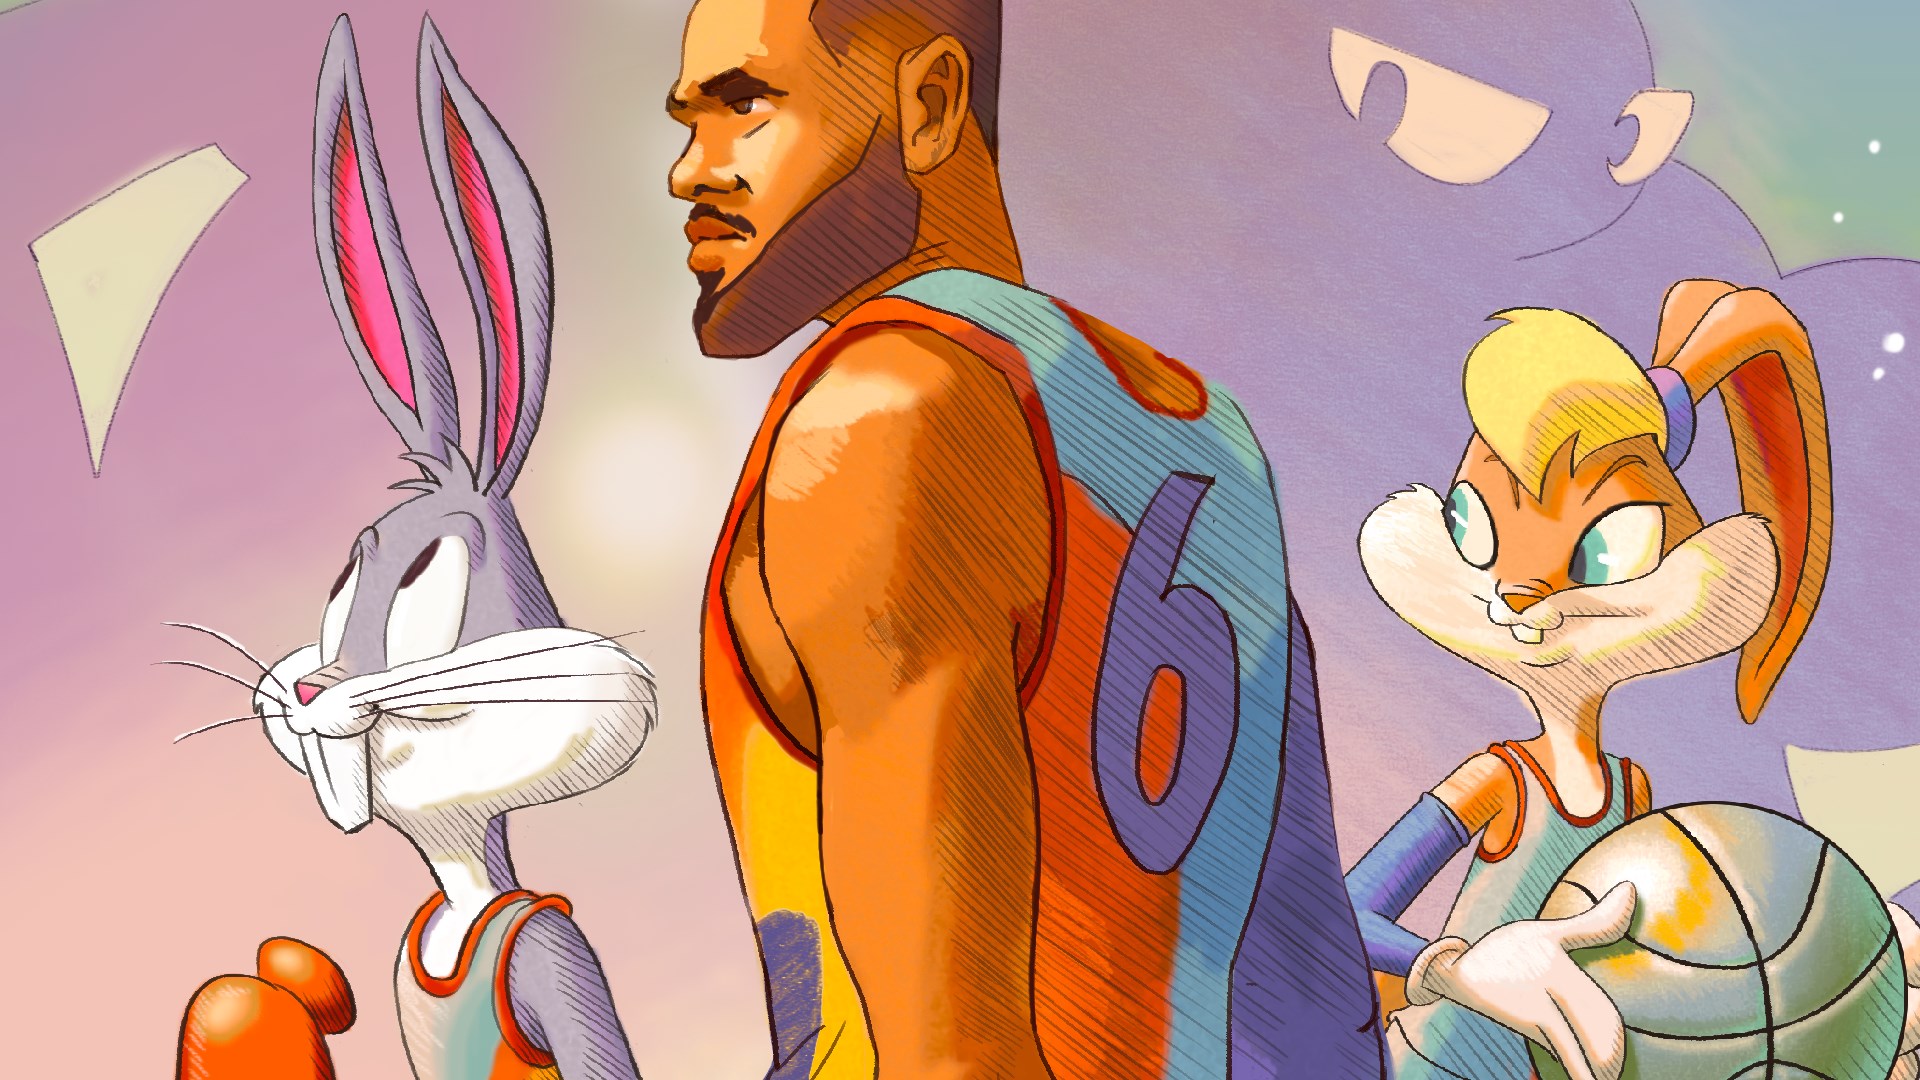 Video For Space Jam: A New Legacy – The Game Is Now Available For Xbox One And Xbox Series X|S